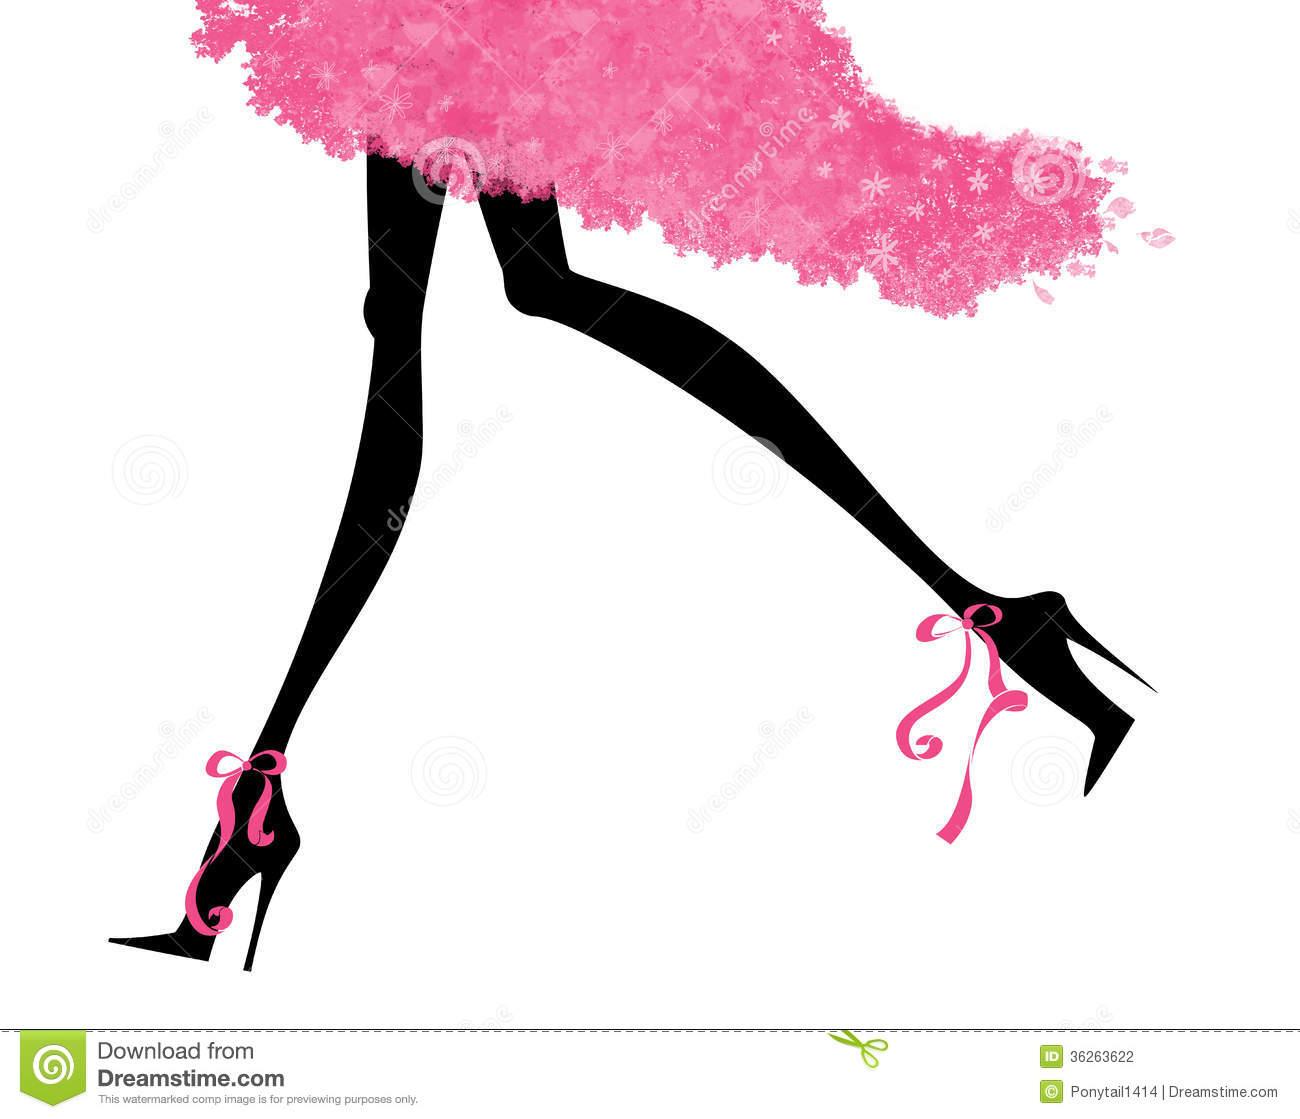 Fashion Illustration Of Long Sexy Legs In Stiletto Heels And A Party